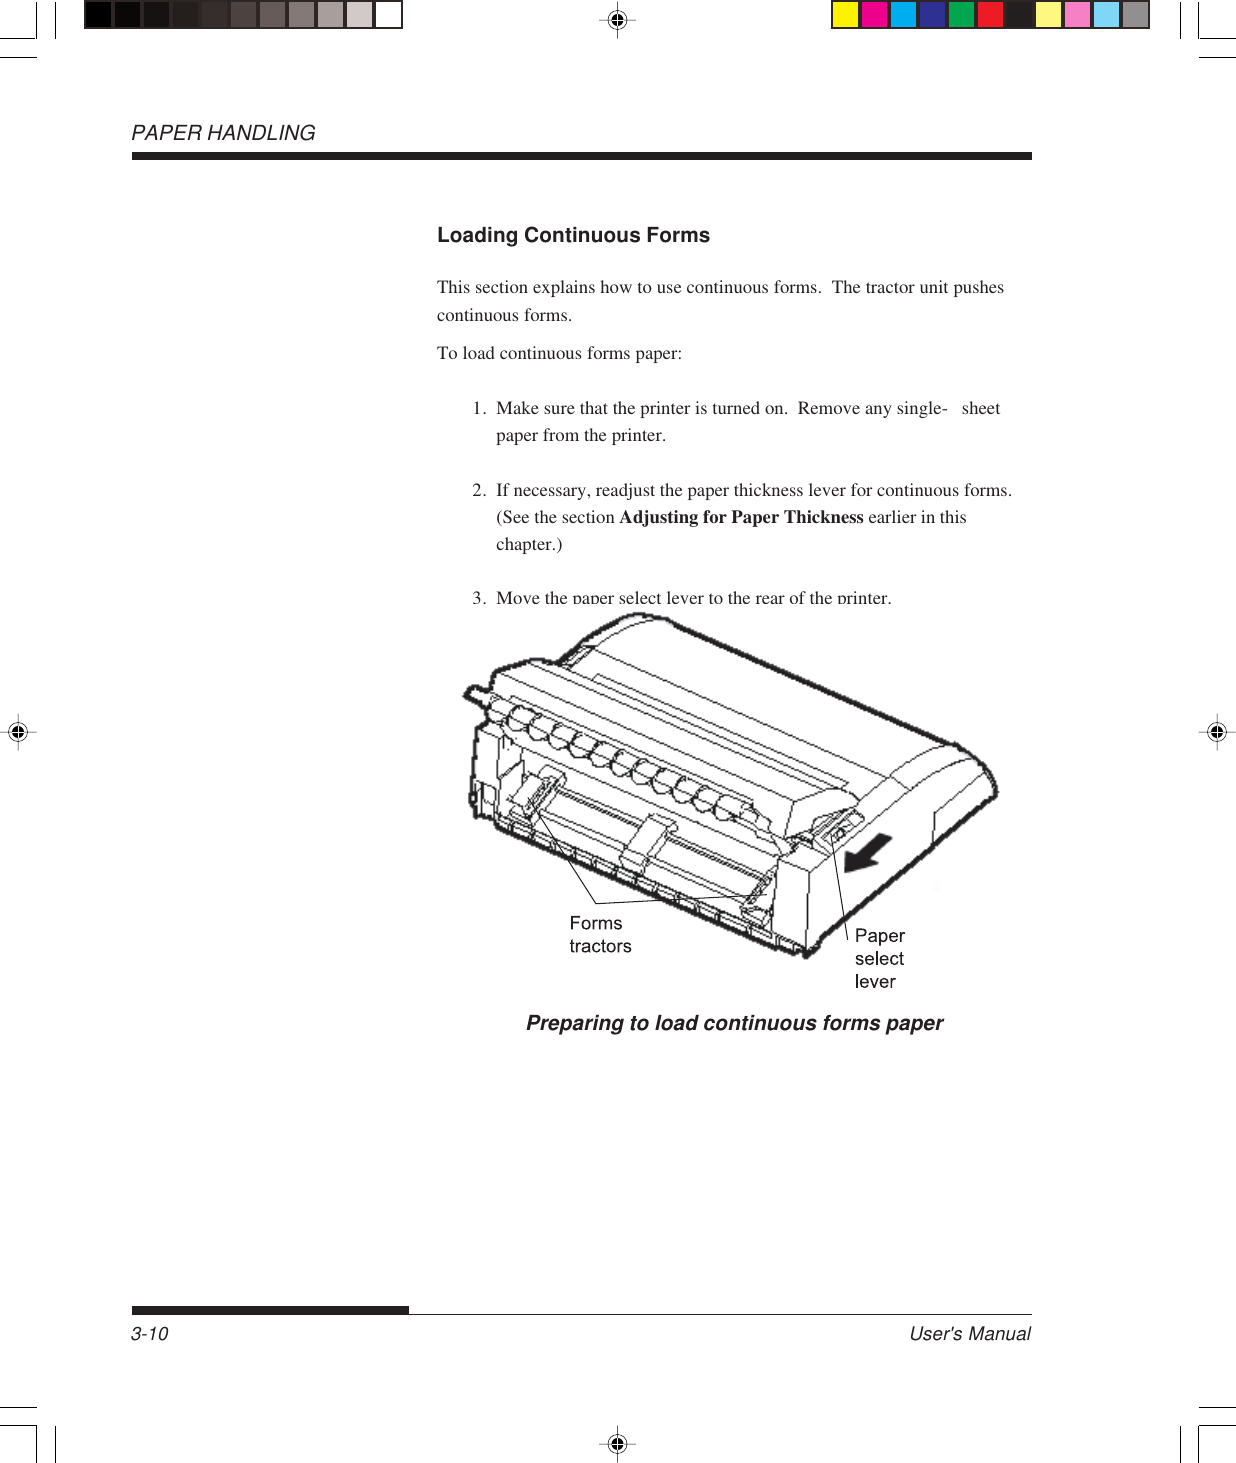 PAPER HANDLINGUser&apos;s Manual3-10Loading Continuous FormsThis section explains how to use continuous forms.  The tractor unit pushescontinuous forms.To load continuous forms paper:1. Make sure that the printer is turned on.  Remove any single- sheetpaper from the printer.2. If necessary, readjust the paper thickness lever for continuous forms.(See the section Adjusting for Paper Thickness earlier in thischapter.)3. Move the paper select lever to the rear of the printer.Preparing to load continuous forms paper